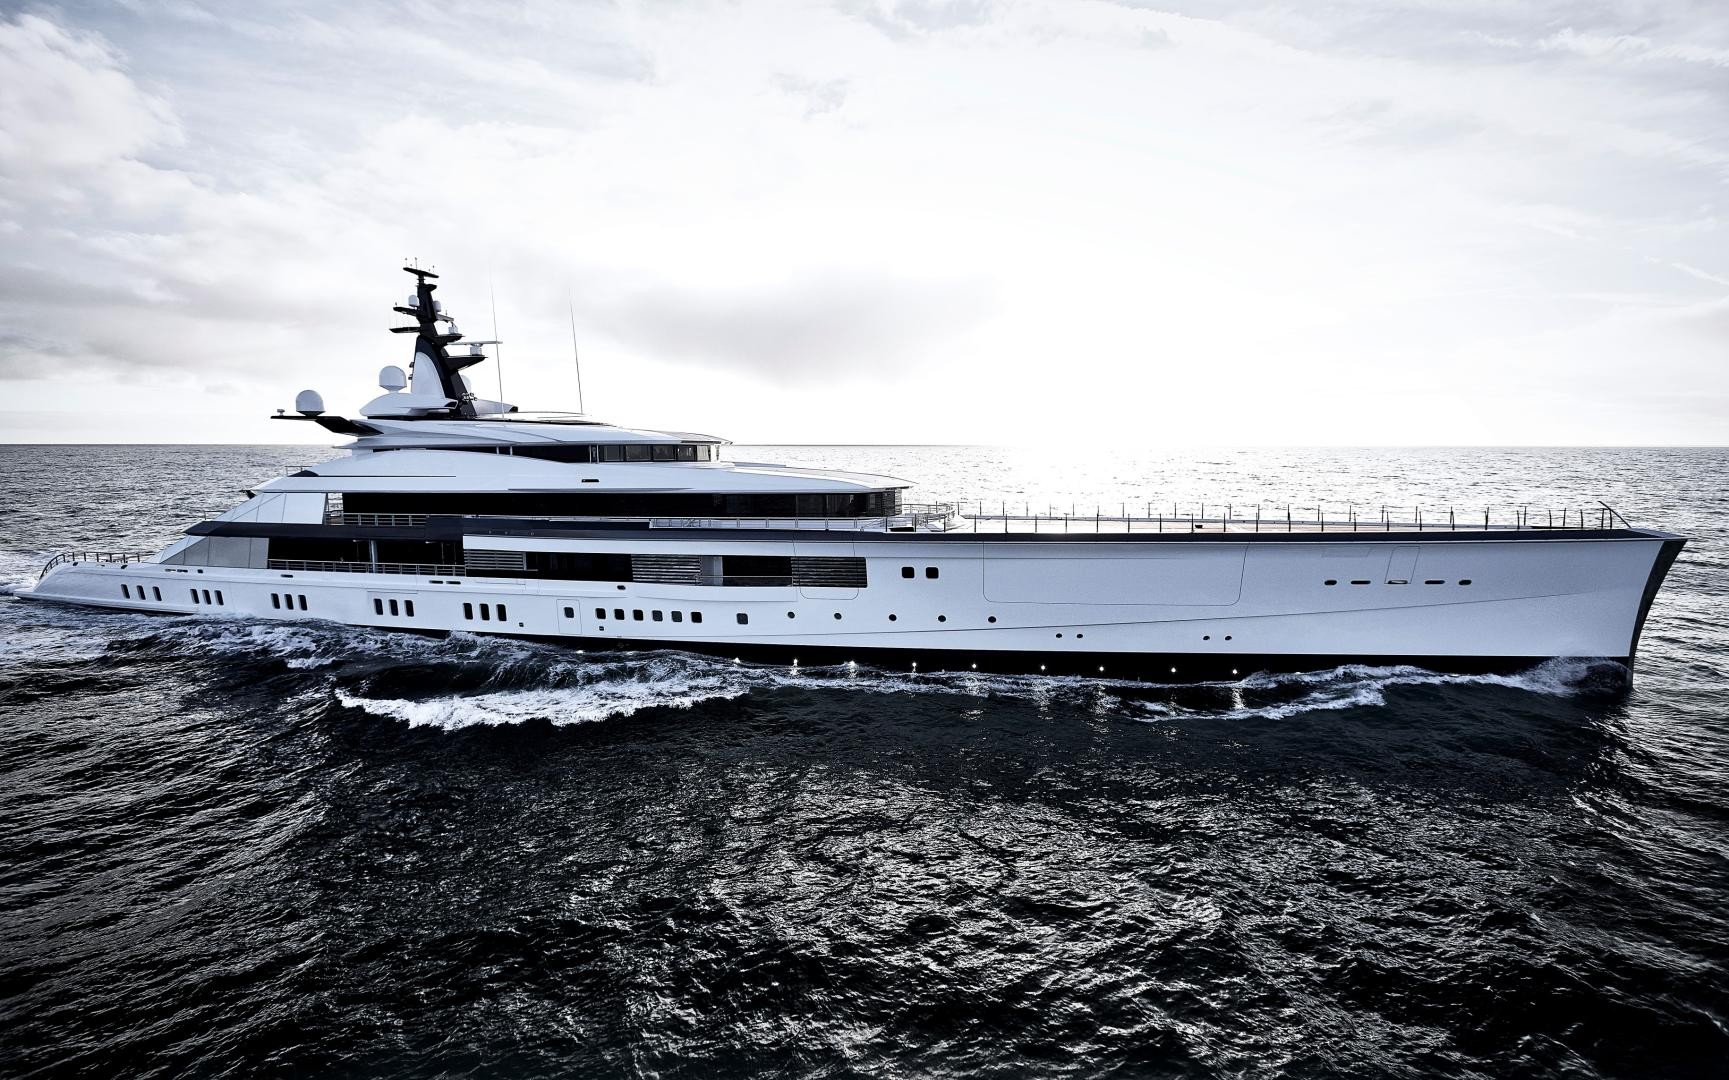  Oceanco delivered the groundbreaking 109m yacht “Project Bravo”